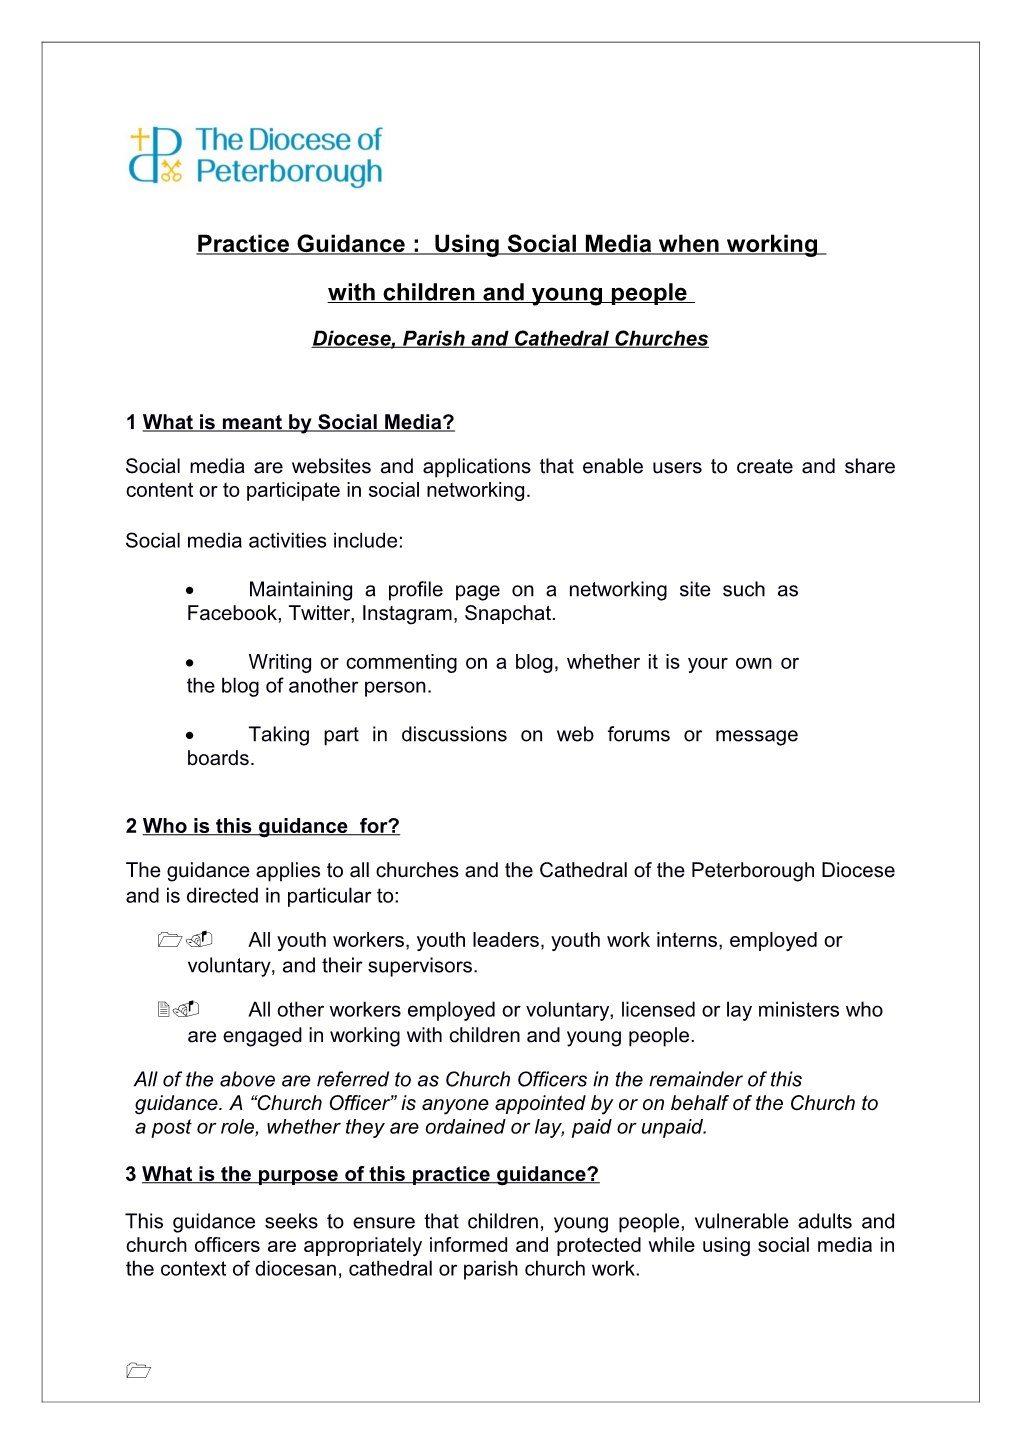 Practice Guidance : Using Social Media When Working